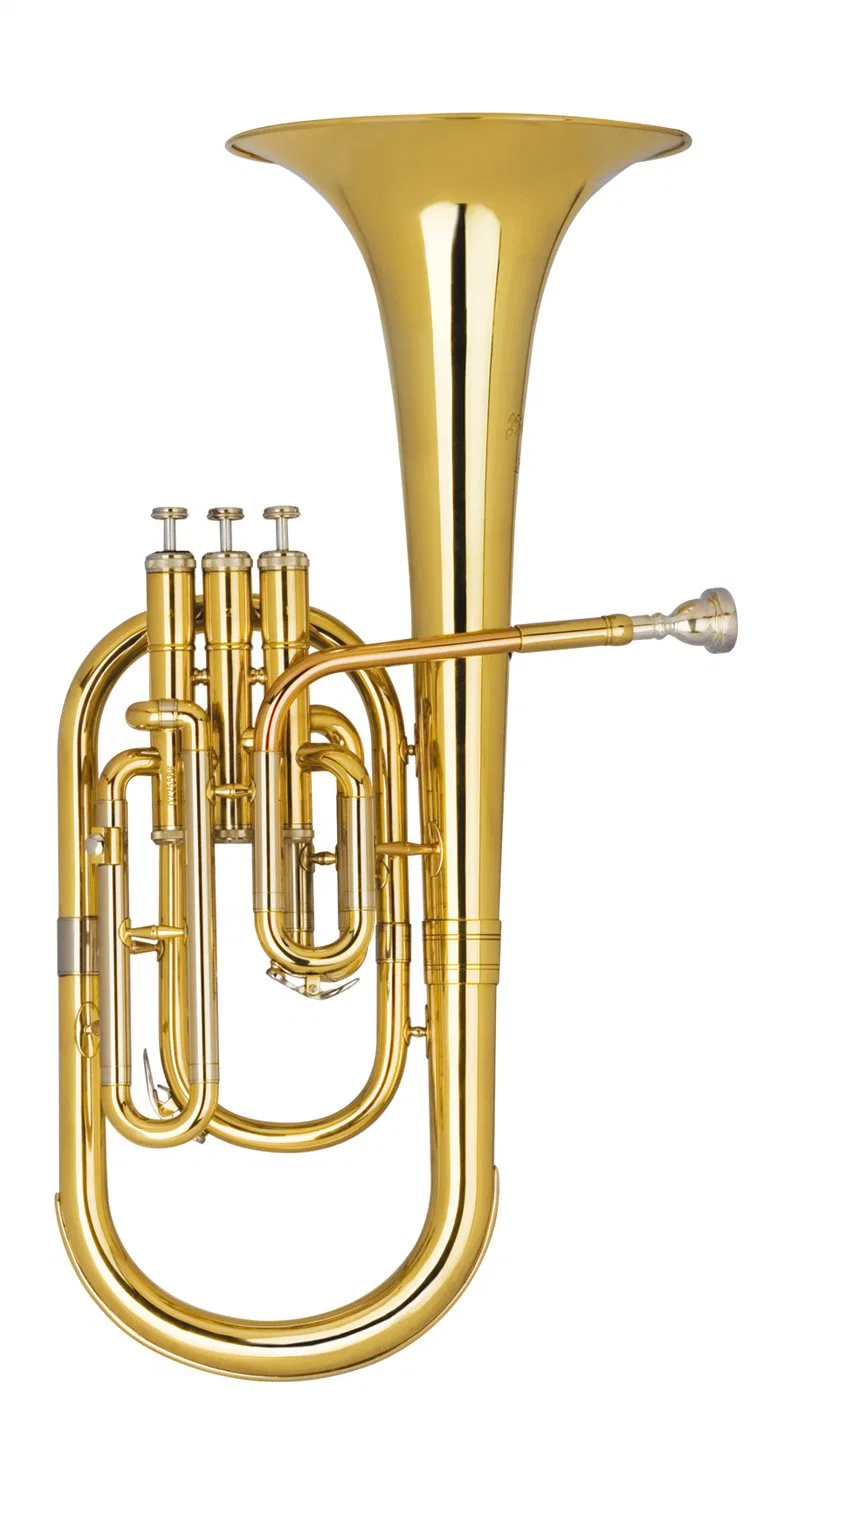 Good Quality Alto Horn Cheap Price Manufacturer